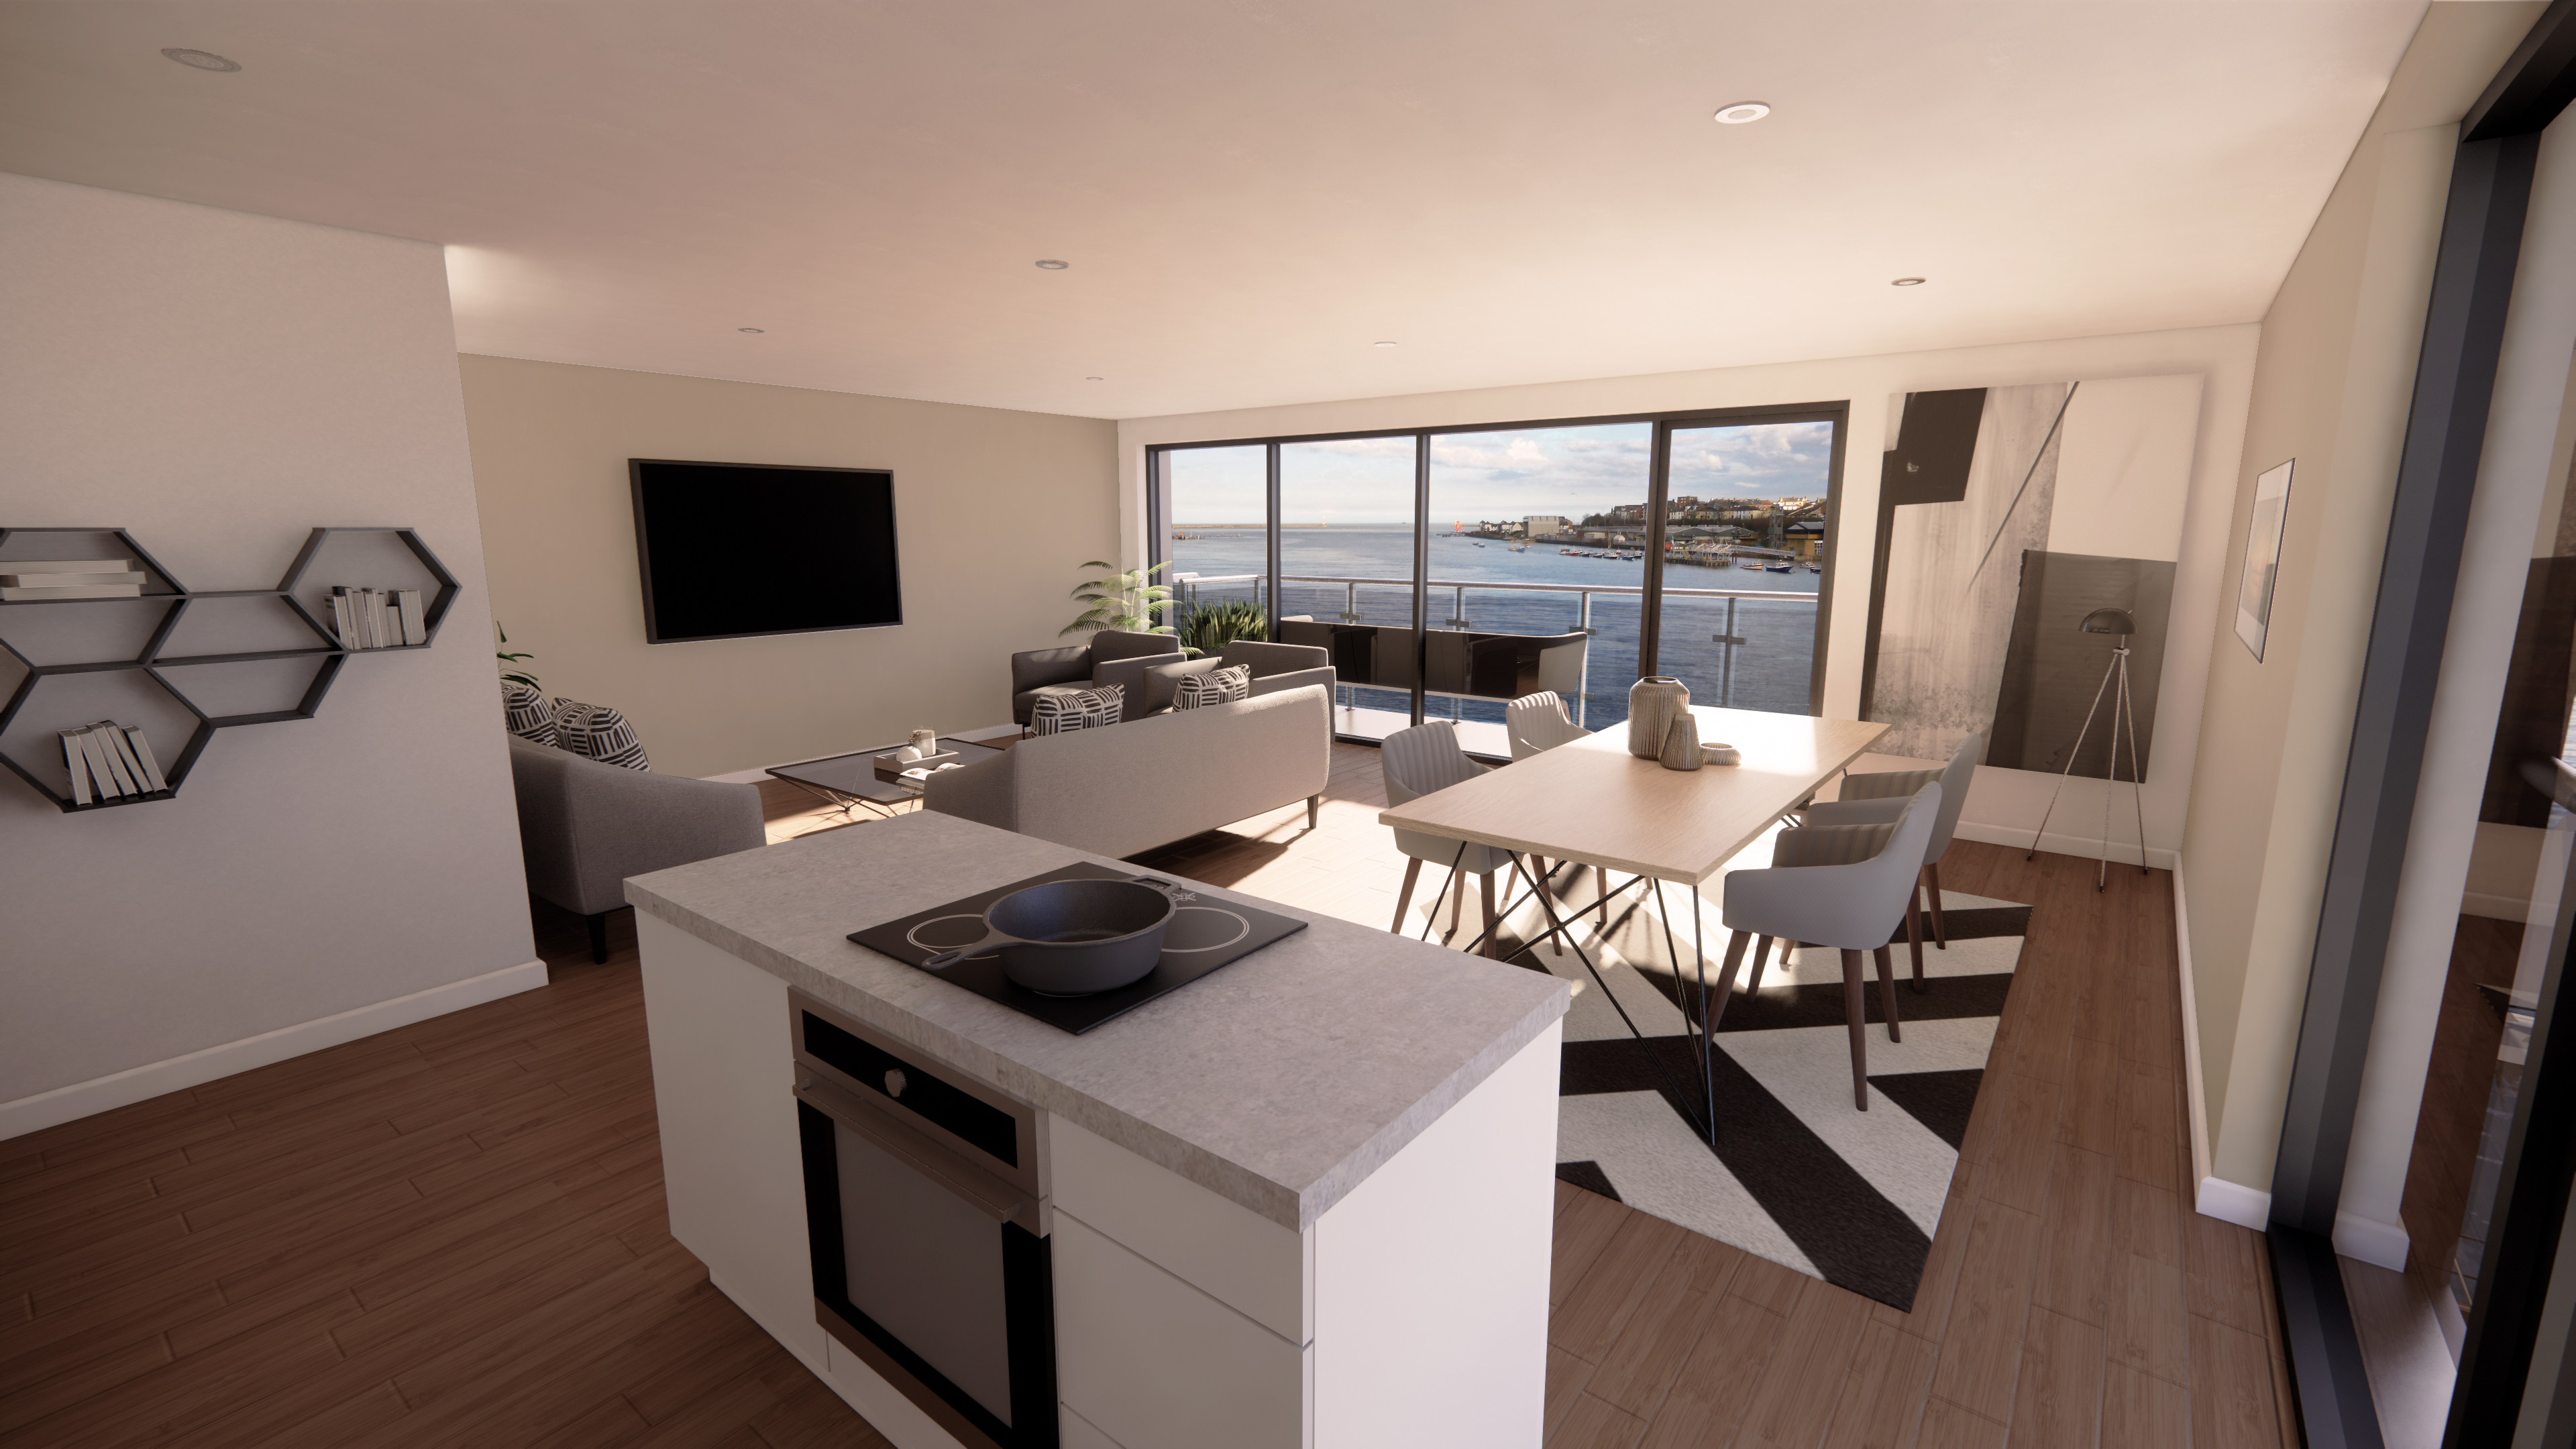 Shepherds Quay - Enscape_Living Space View 1 (Style 1).jpg